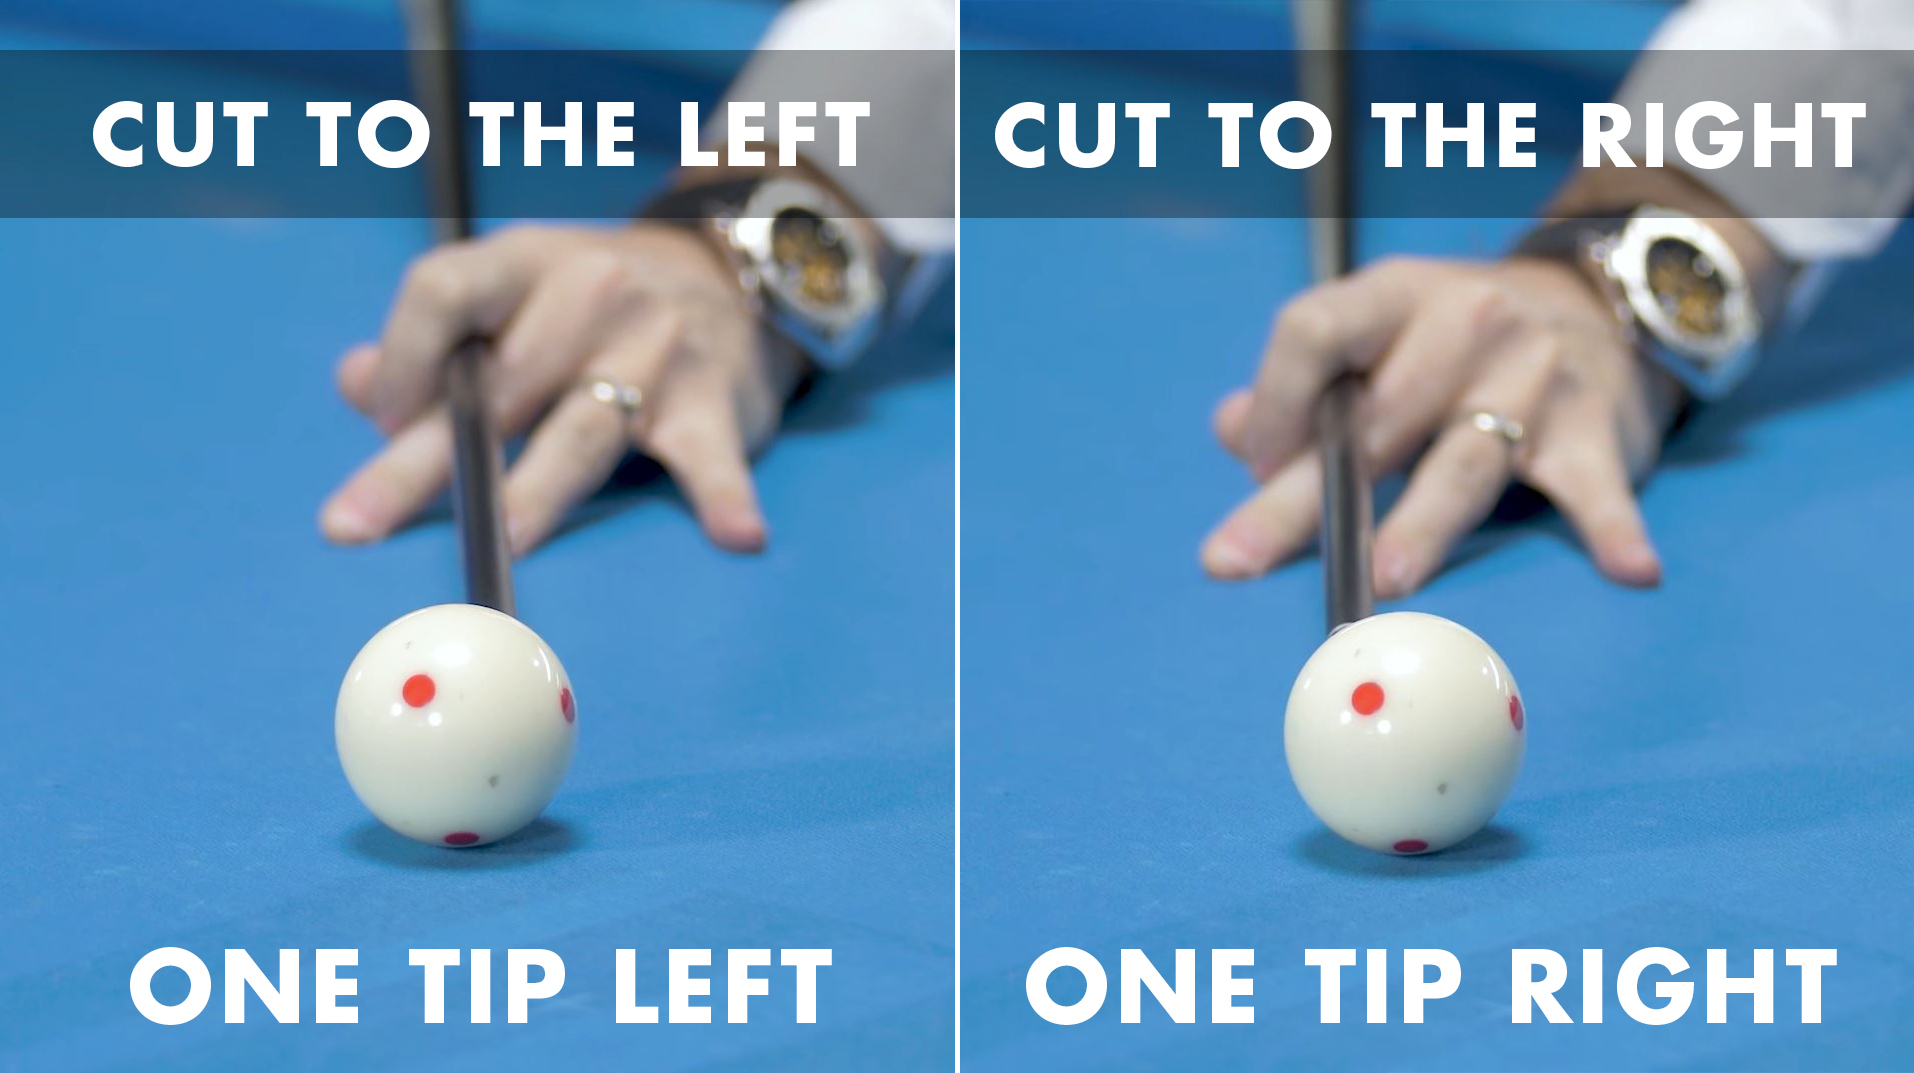 CTE aiming requires planting your bridge hand with one tip of left spin for left cut shots or one tip of right if cutting to the right.